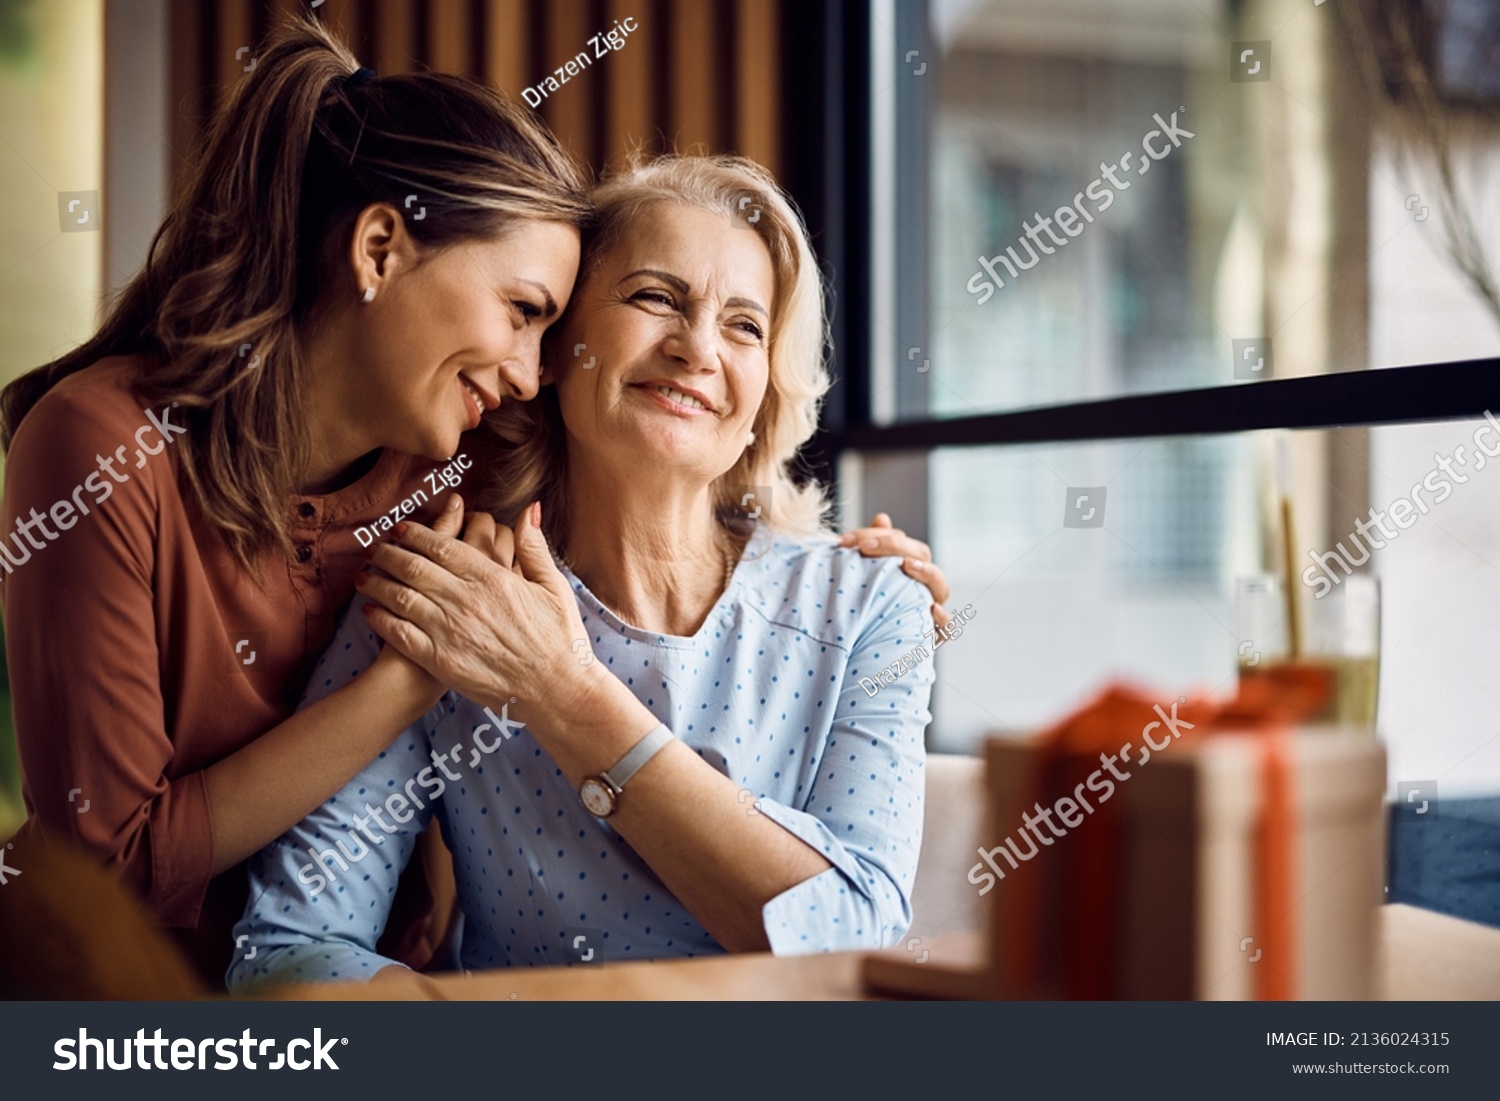 Happy senior woman enjoying in daughter's affection on Mother's day. #2136024315